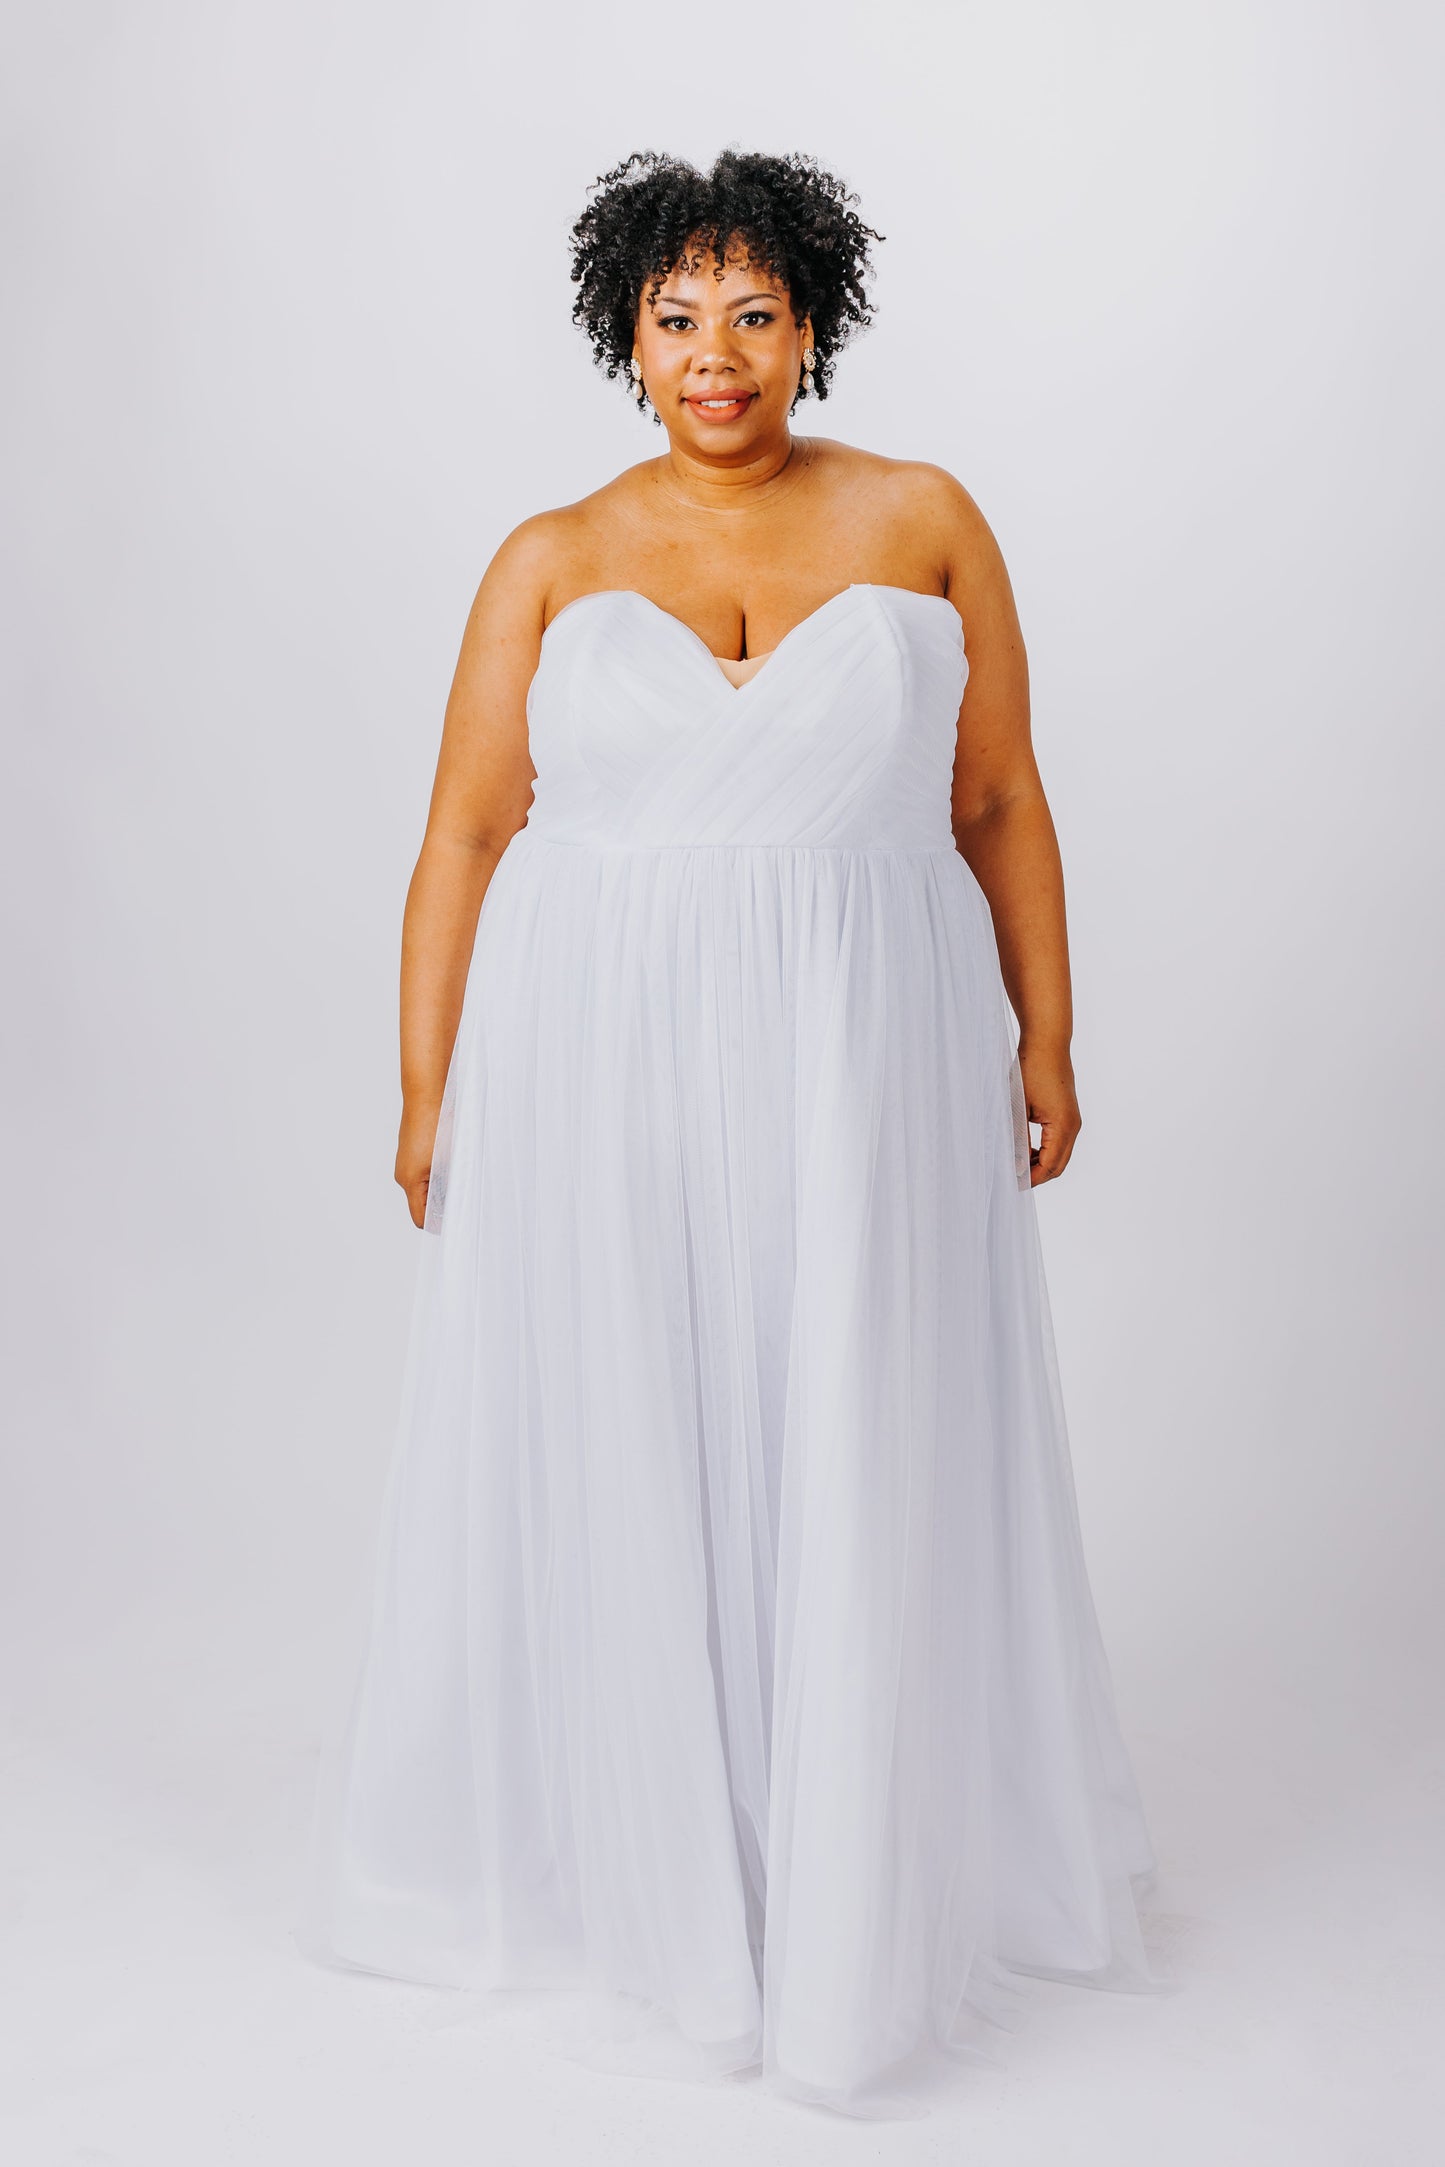 Size 20-22 Sample - Jessica Gown